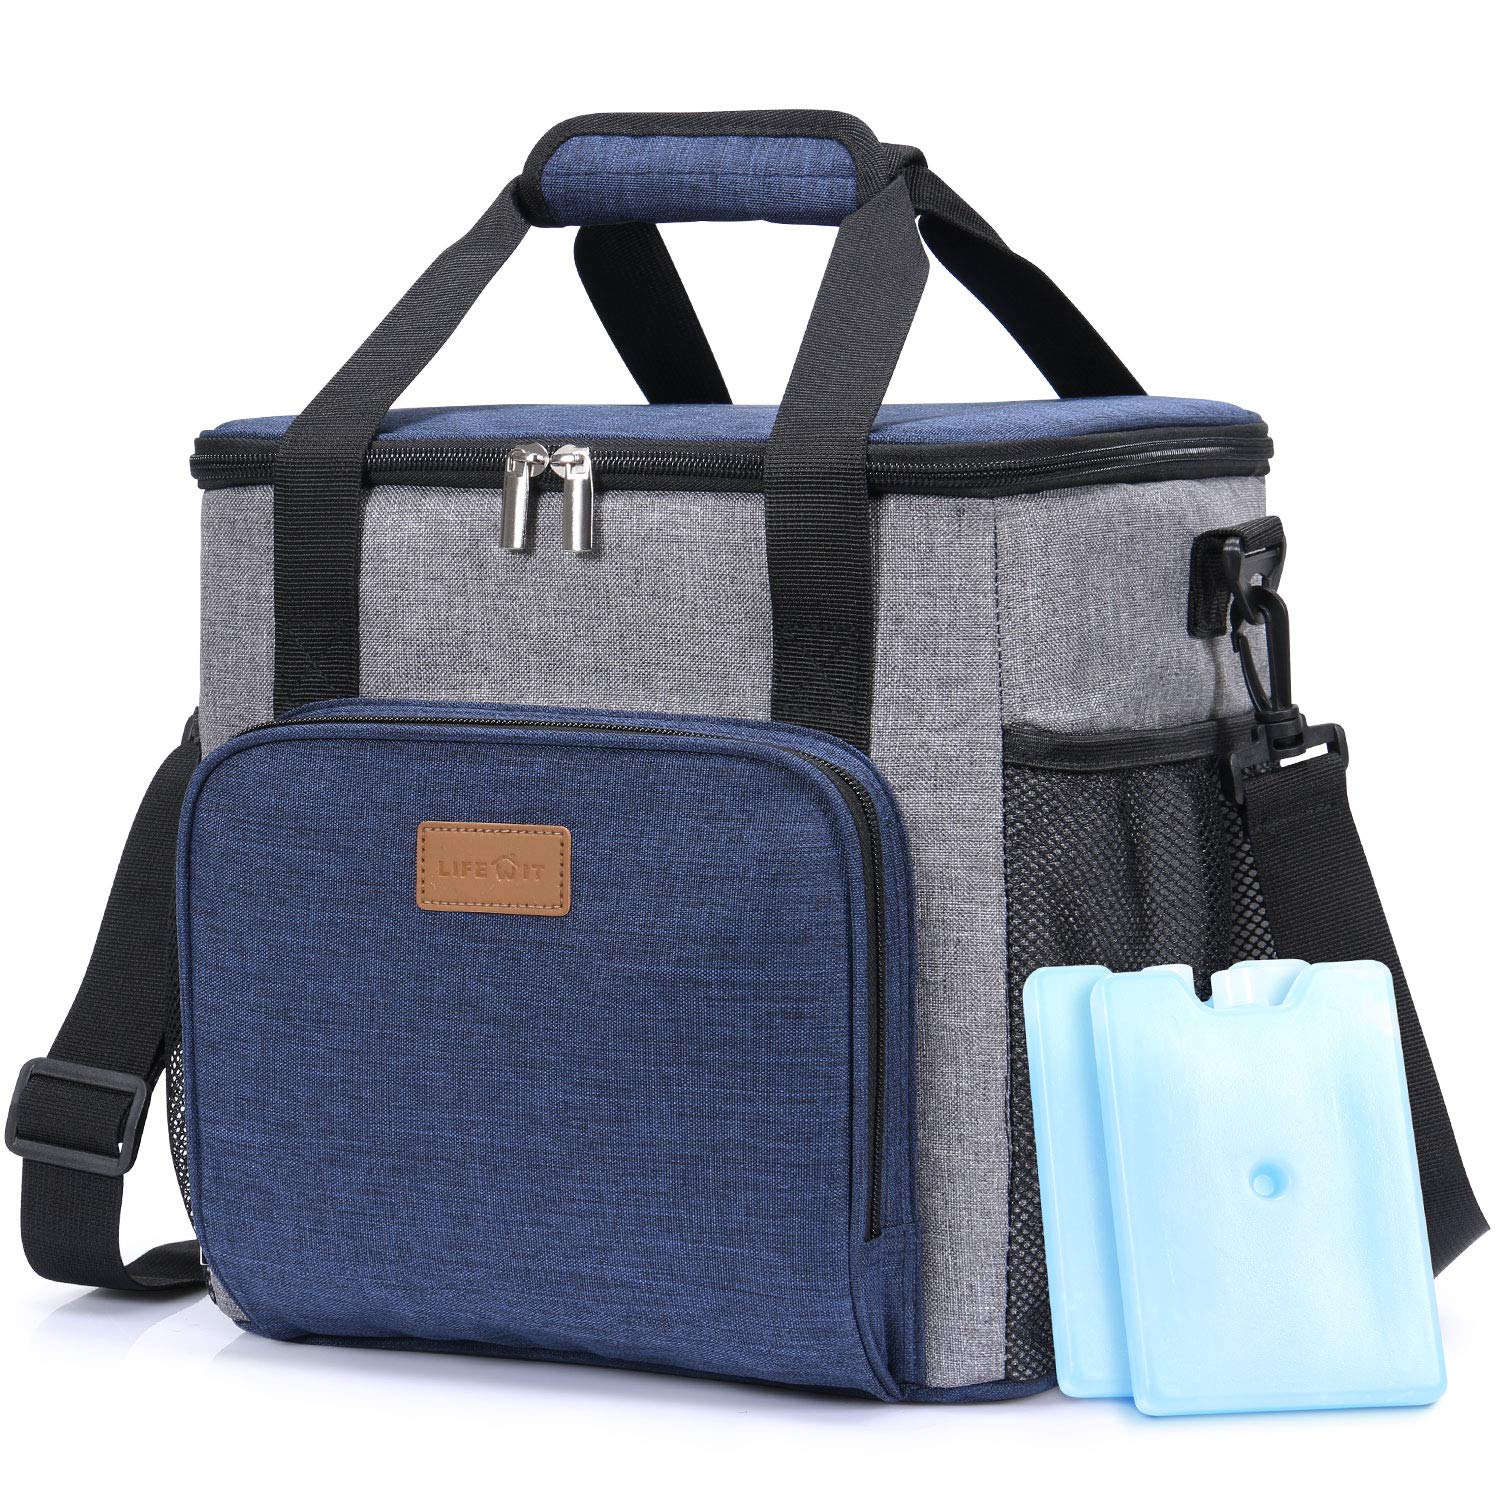 Amazon.com : Lifewit 24-Can Large Cooler Bag Insulated Lunch Bag, Soft  Cooler Bag for Beach/Picnic / Camping/BBQ, Grey : Garde… | Backpack lunch  bag, Bags, Fun bags